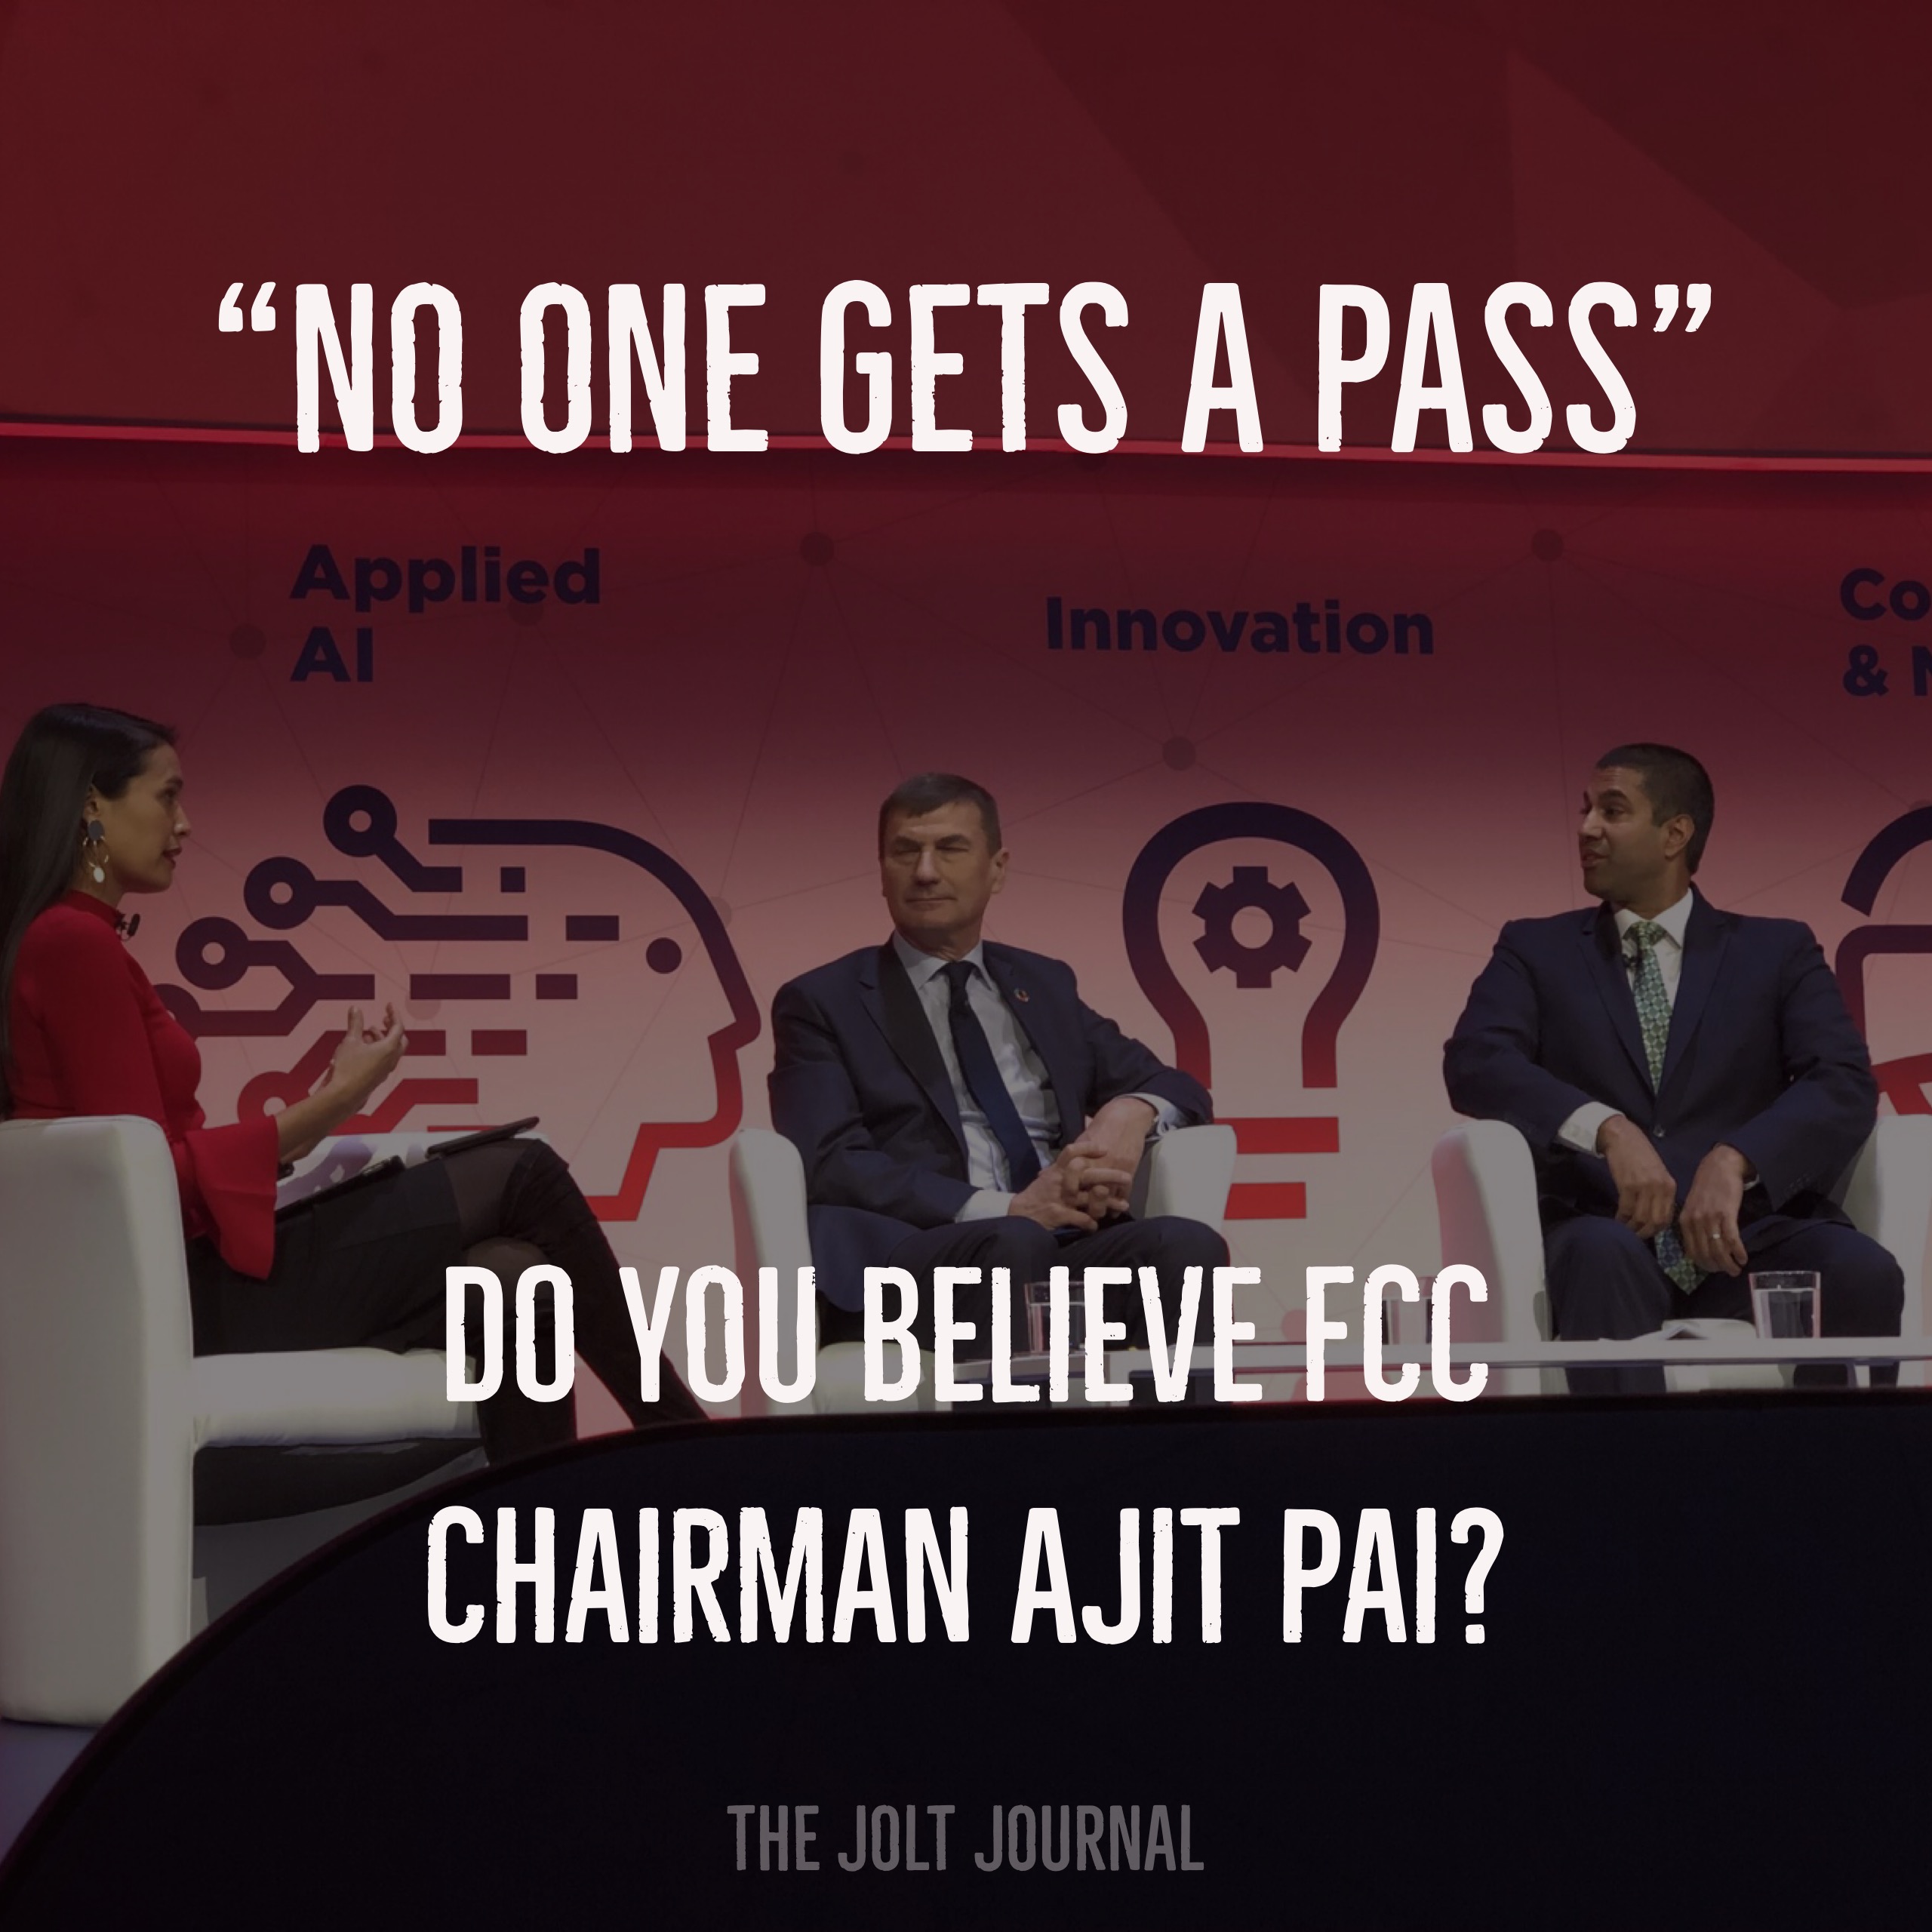 FCC Chairman Ajit Pai speaks at MWC 2018, talks 5G and net neutrality repeal